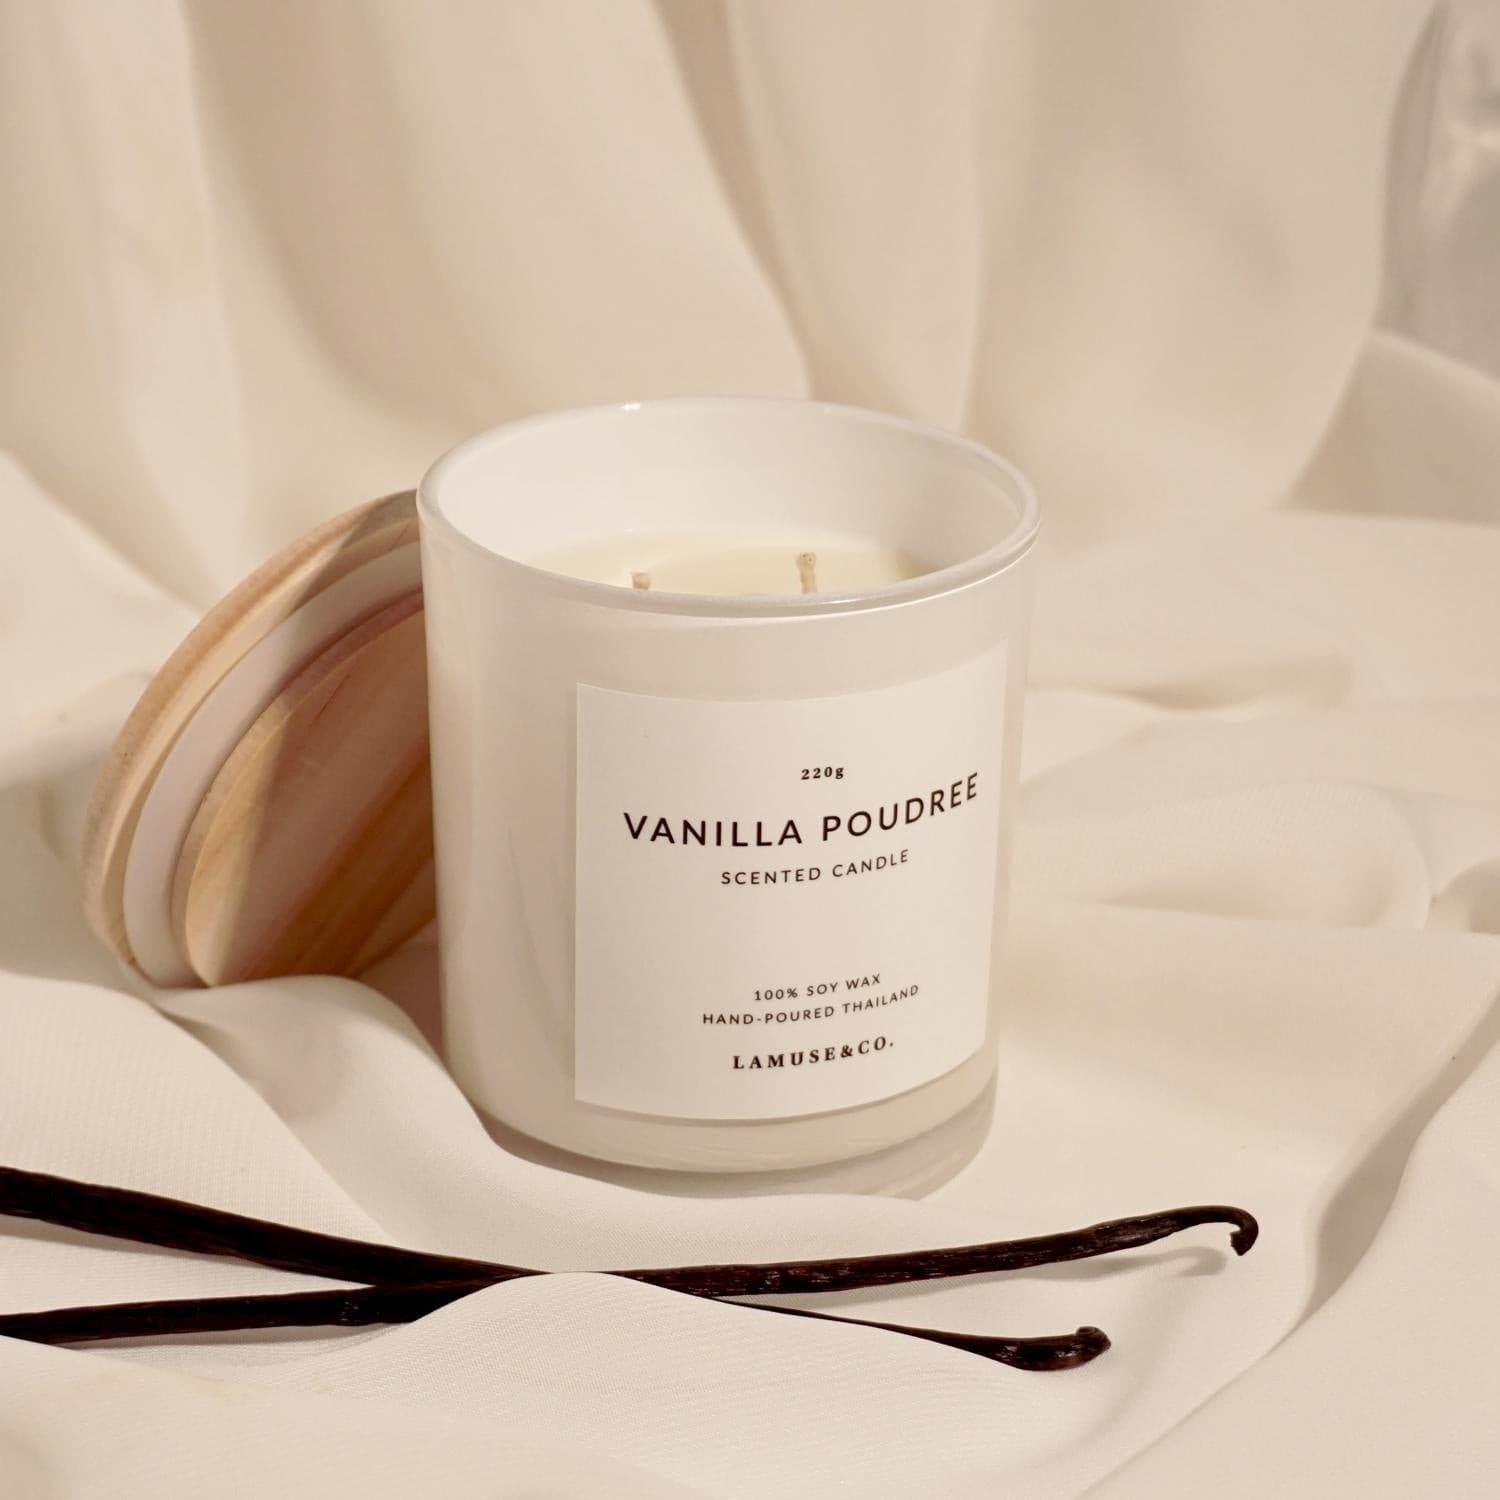 Vanilla Poudree Scented Candle 220g scented candle.